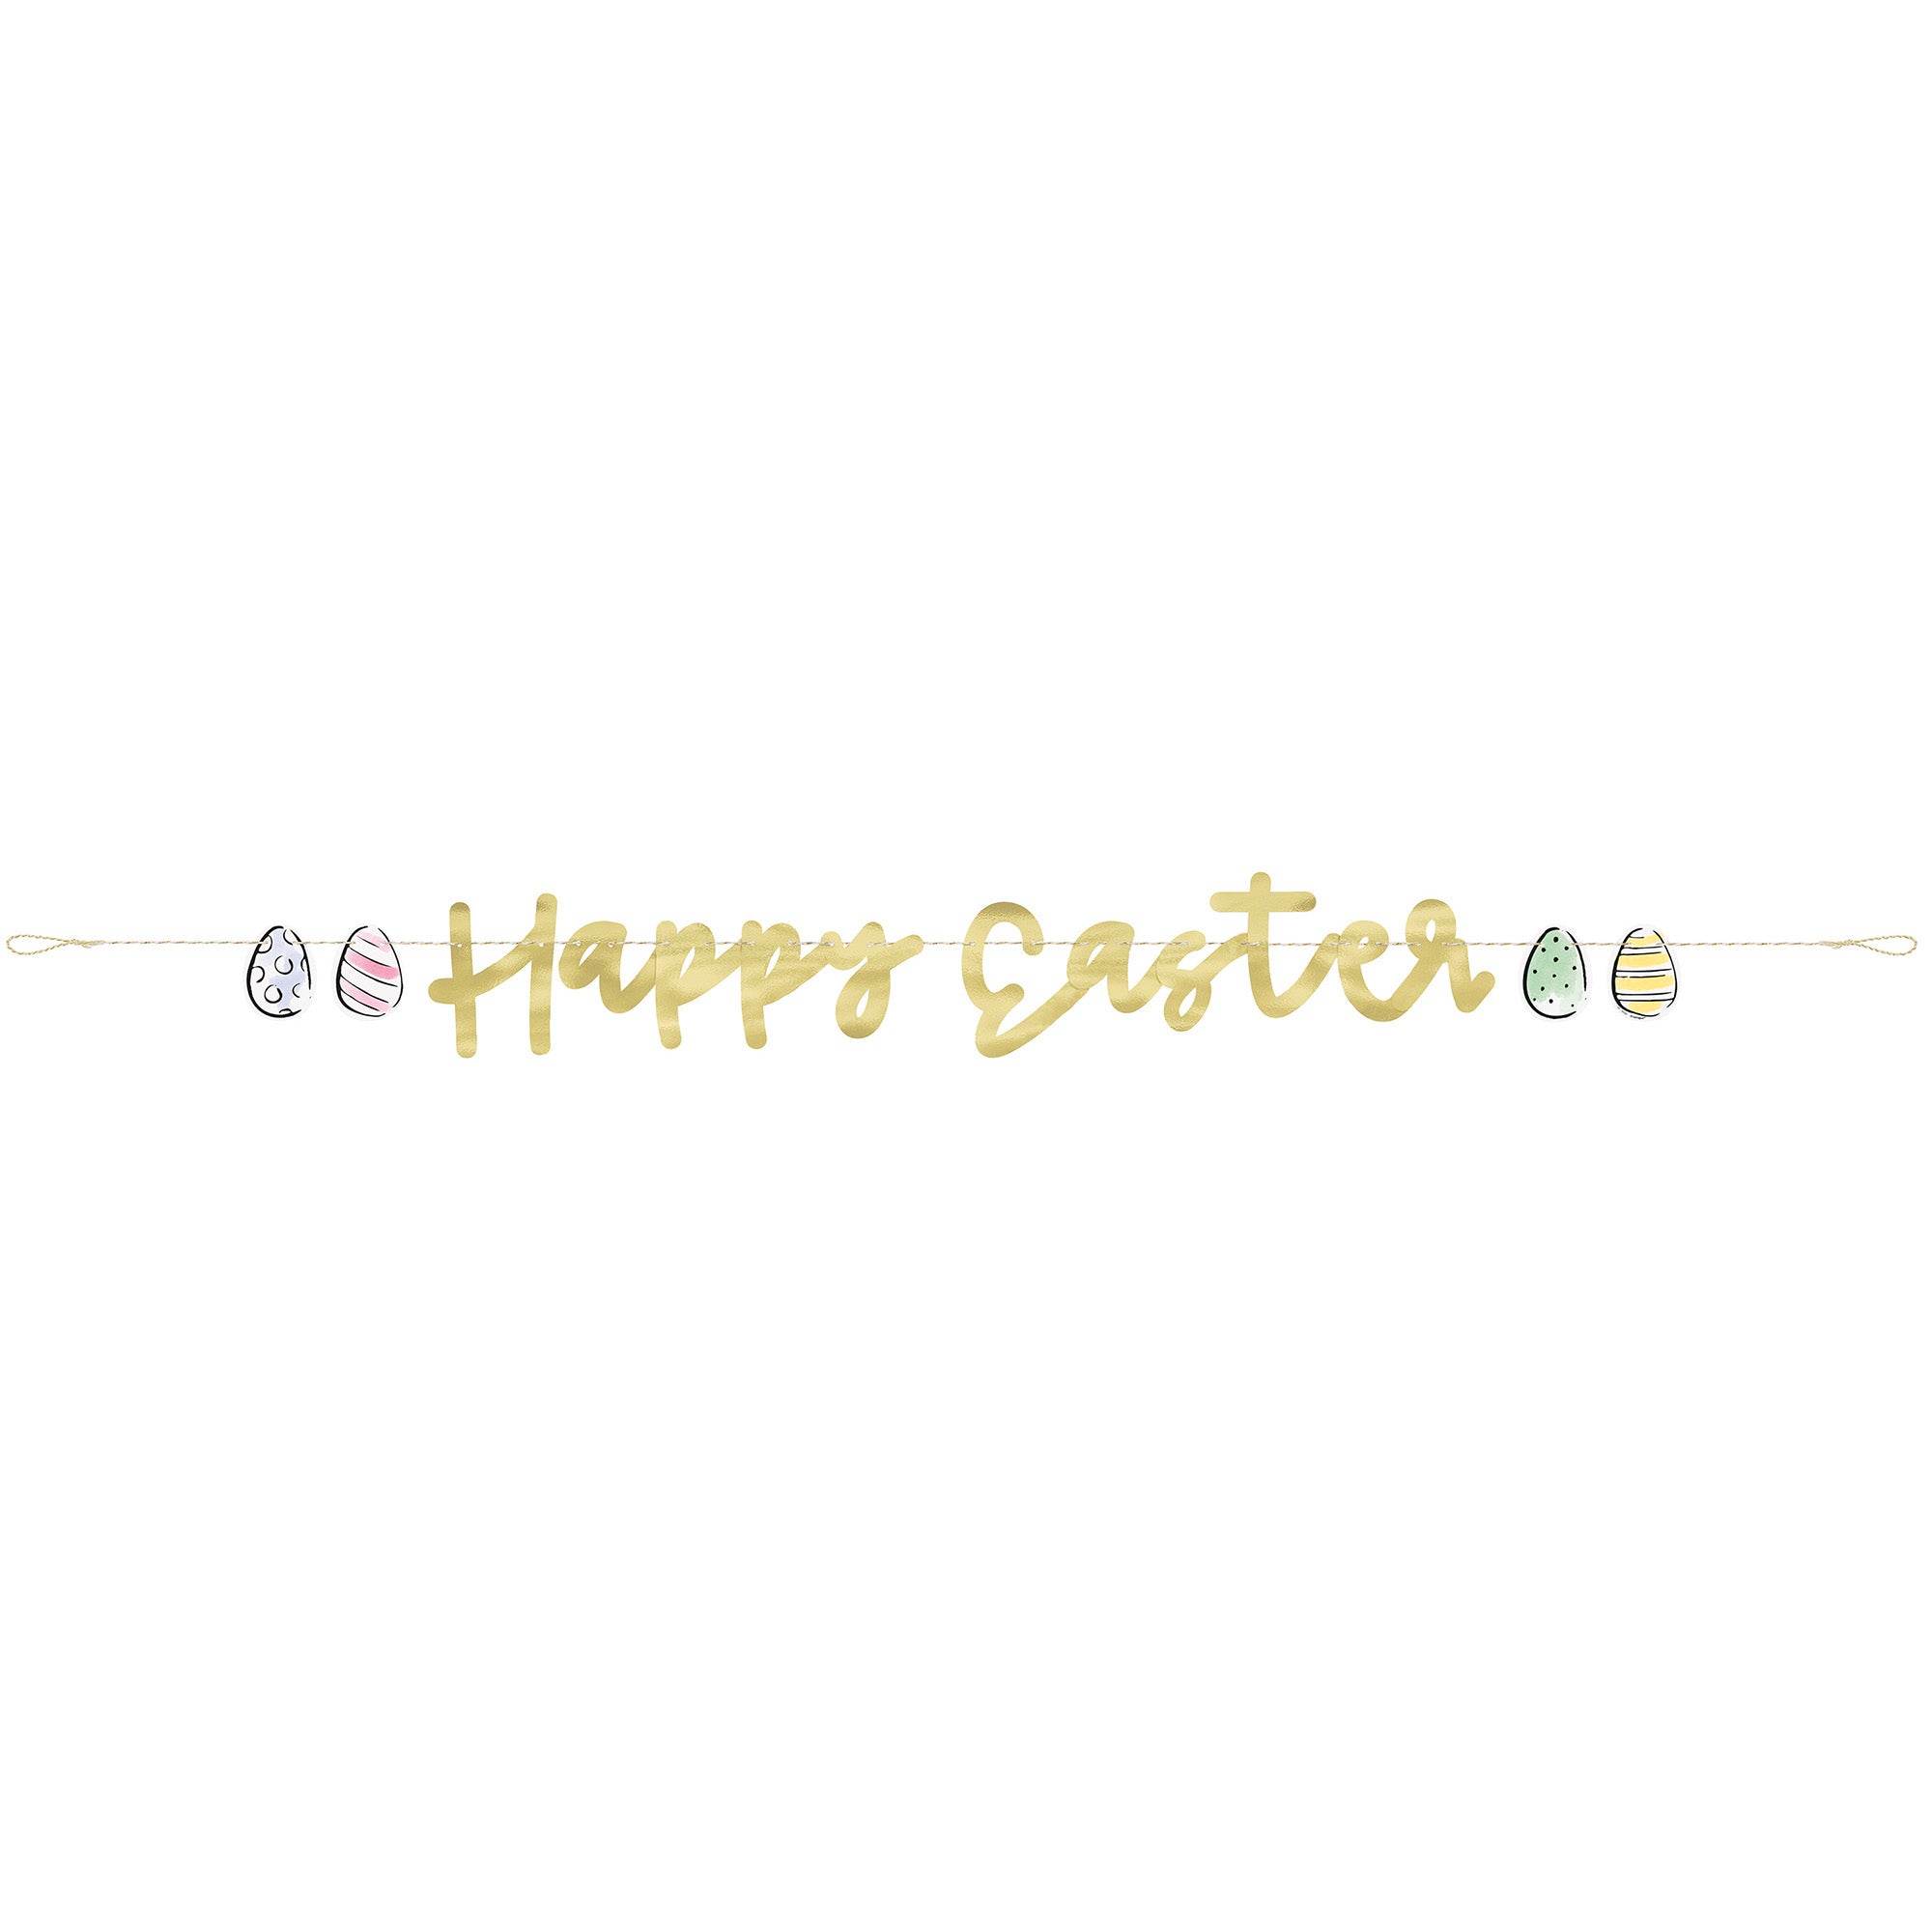 Egg-stra Accents Happy Easter Diecut Foil Banner 60in